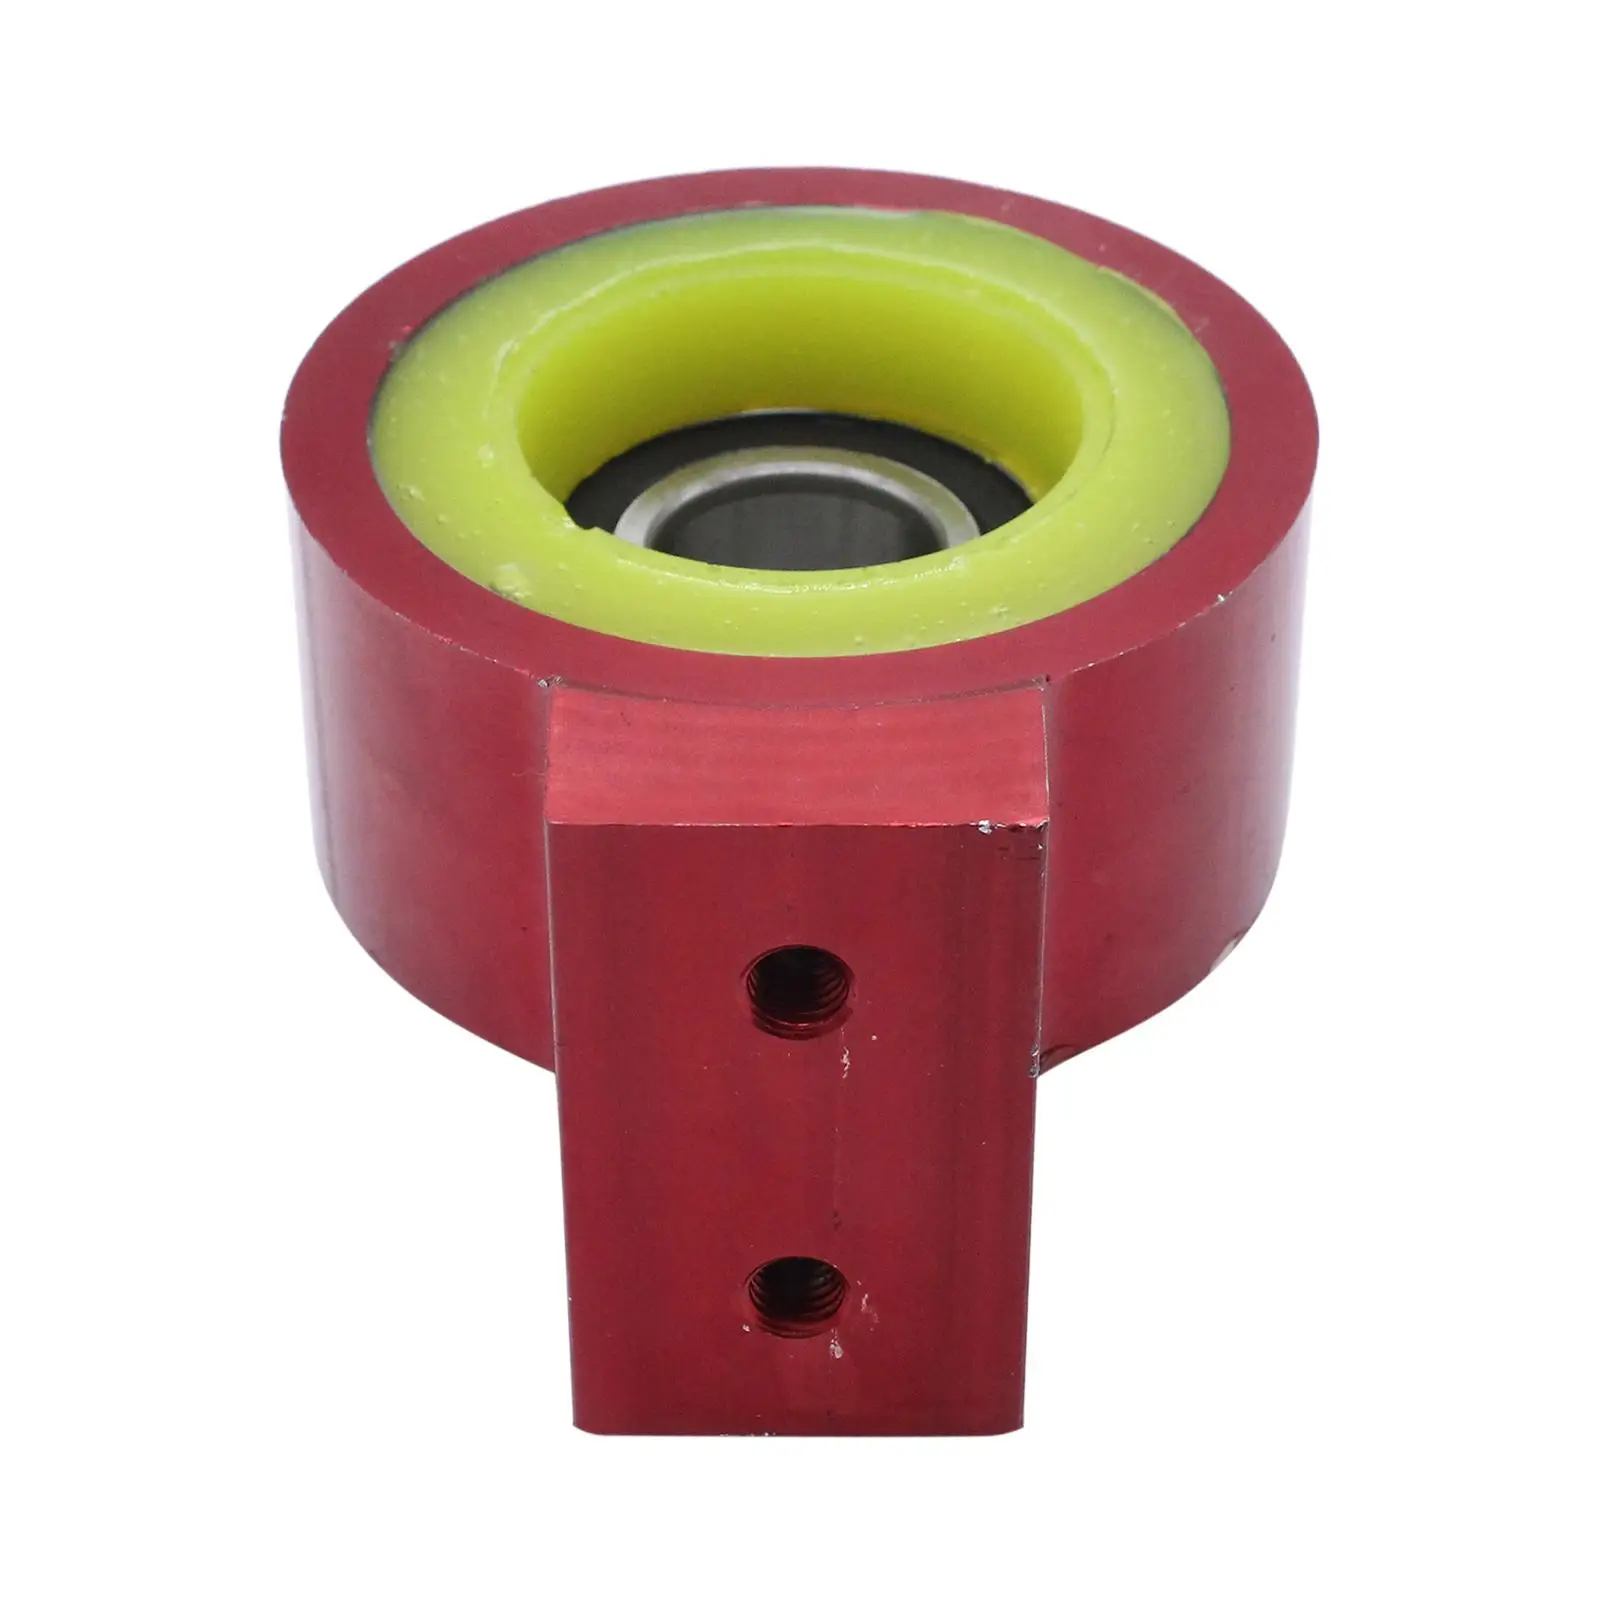 Vehicle Poly Driveshaft Carrier Bearing, Heavy Duty Accessories Red Metal Center Support Drive Shaft, 9584